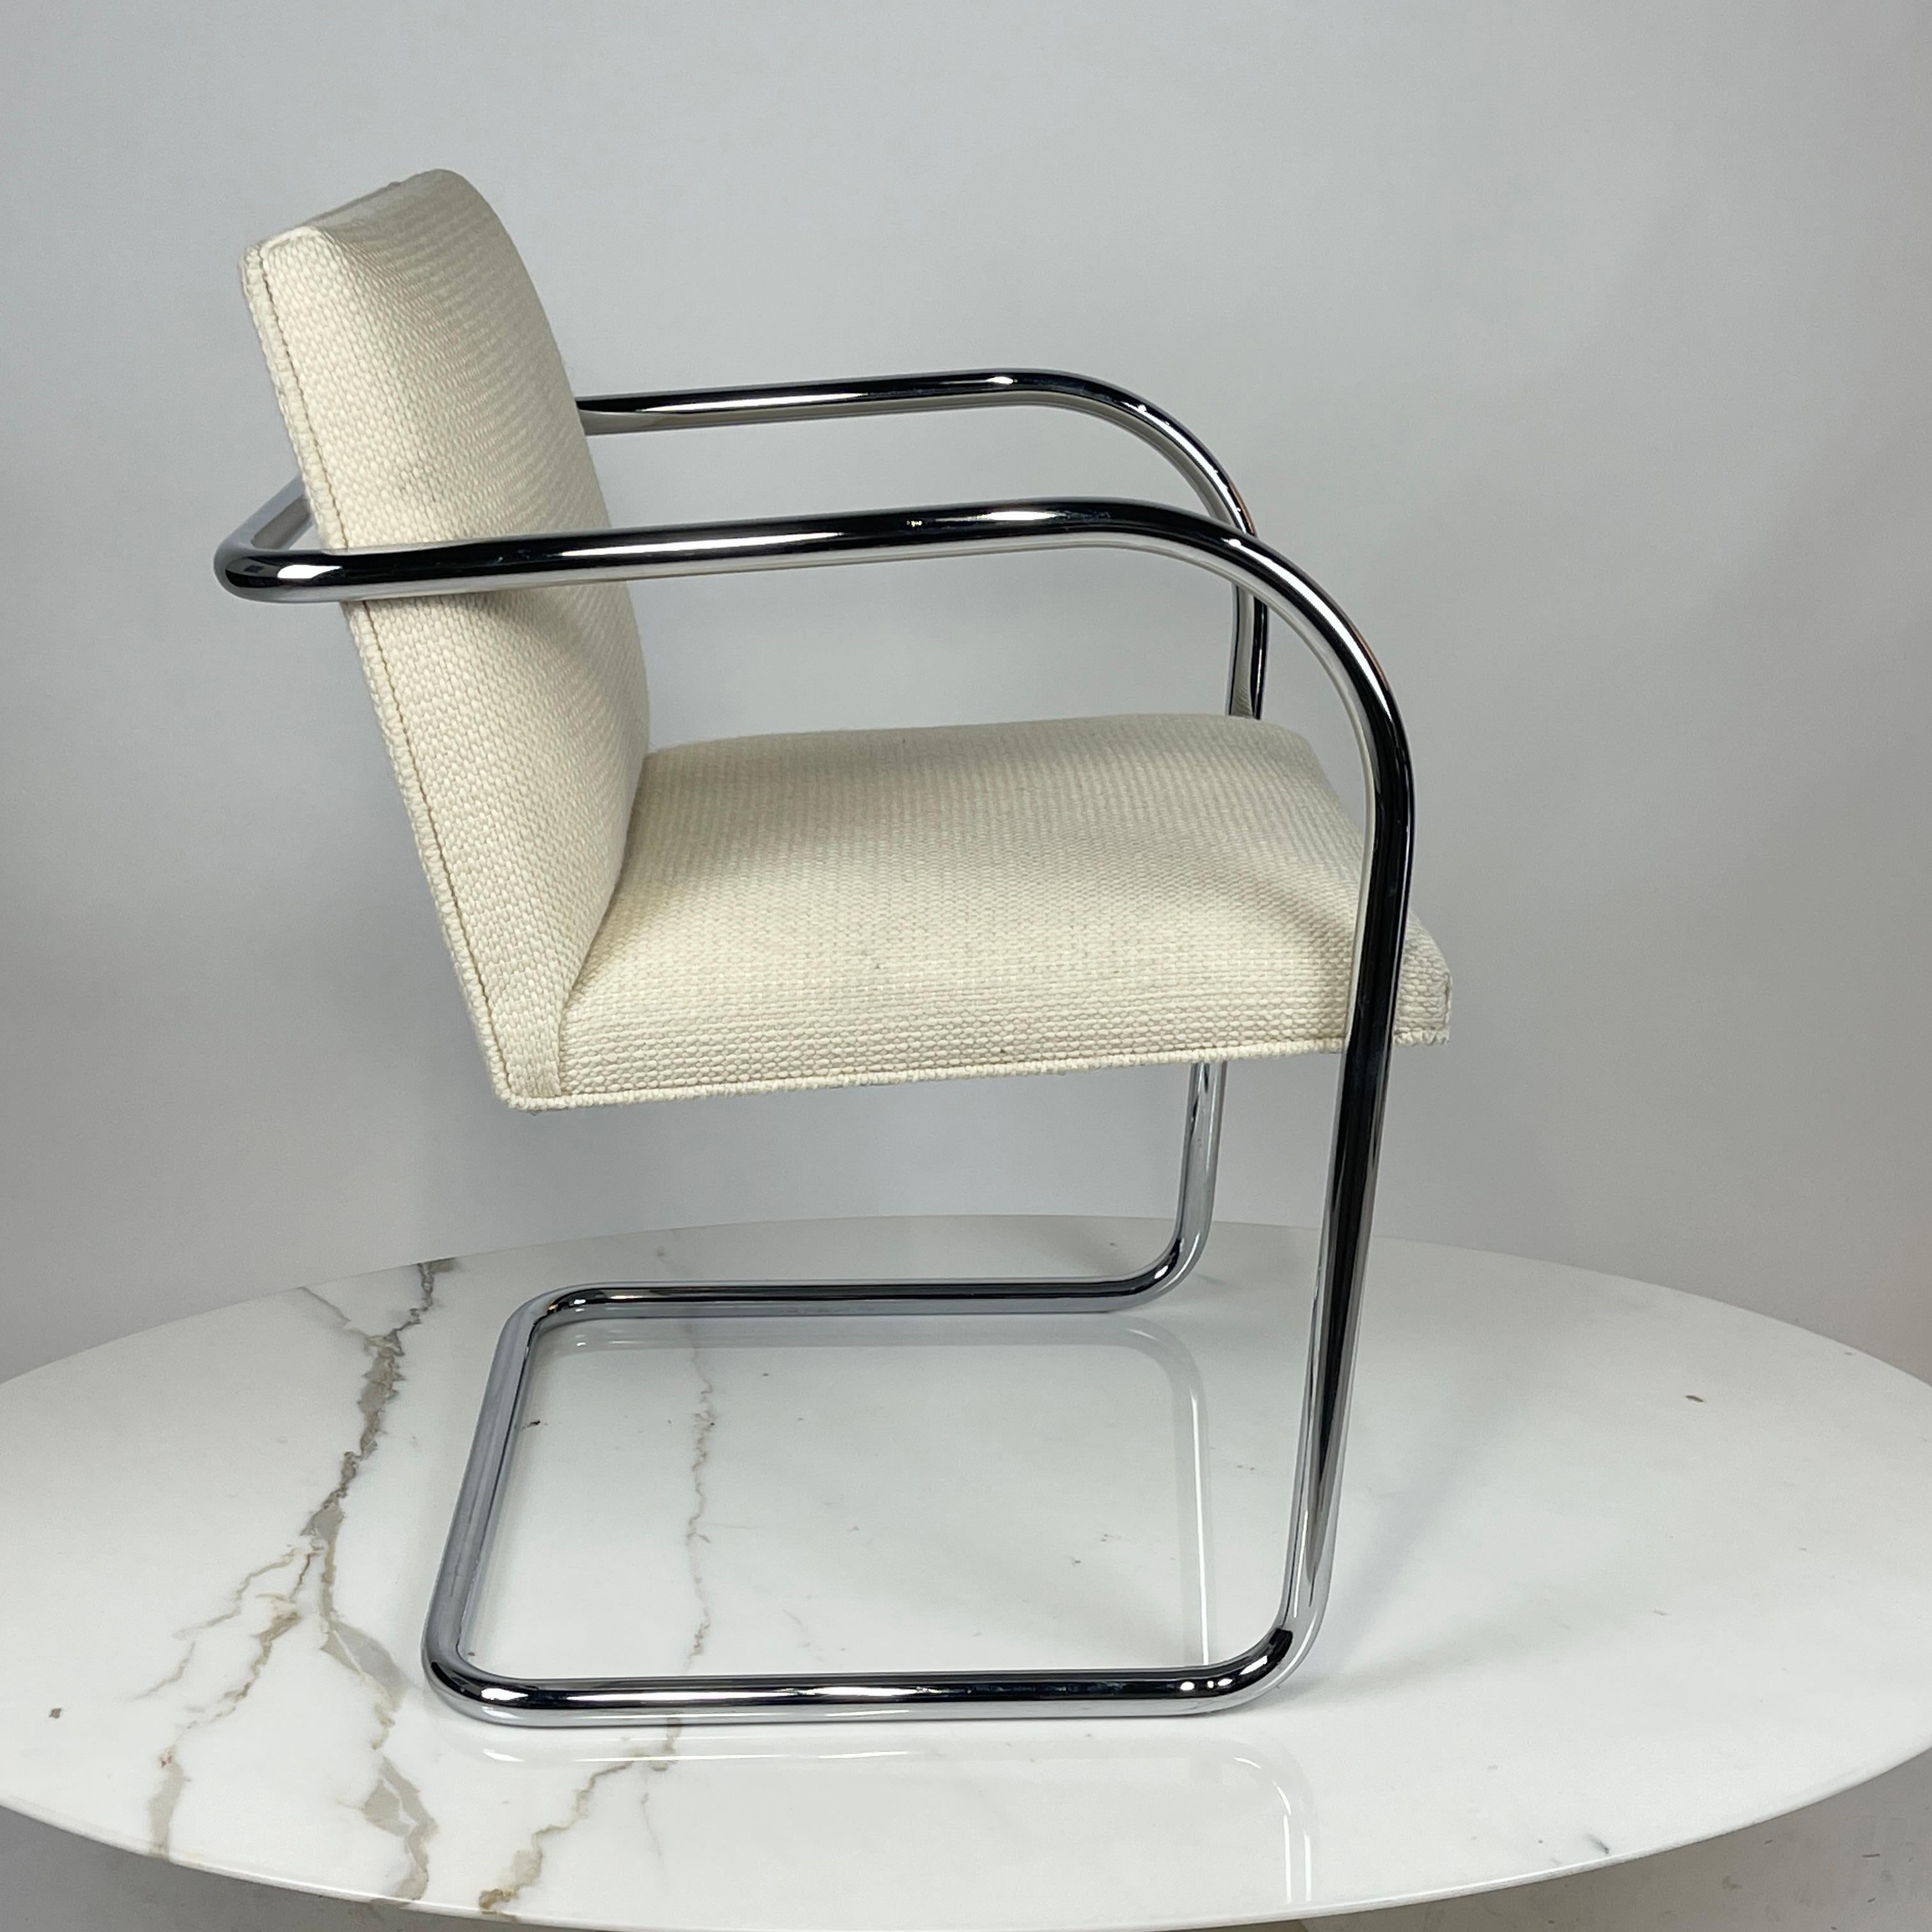 THIS LISTING IS FOR A SET OF 4

Knoll Brno chair designed by Mies Van der Rohe. These chairs are upholstered in Knoll's Cato upholstery. Color is 'natural'- which reads as a pale oatmeal color. These chairs are from 2018 so in very nice condition.